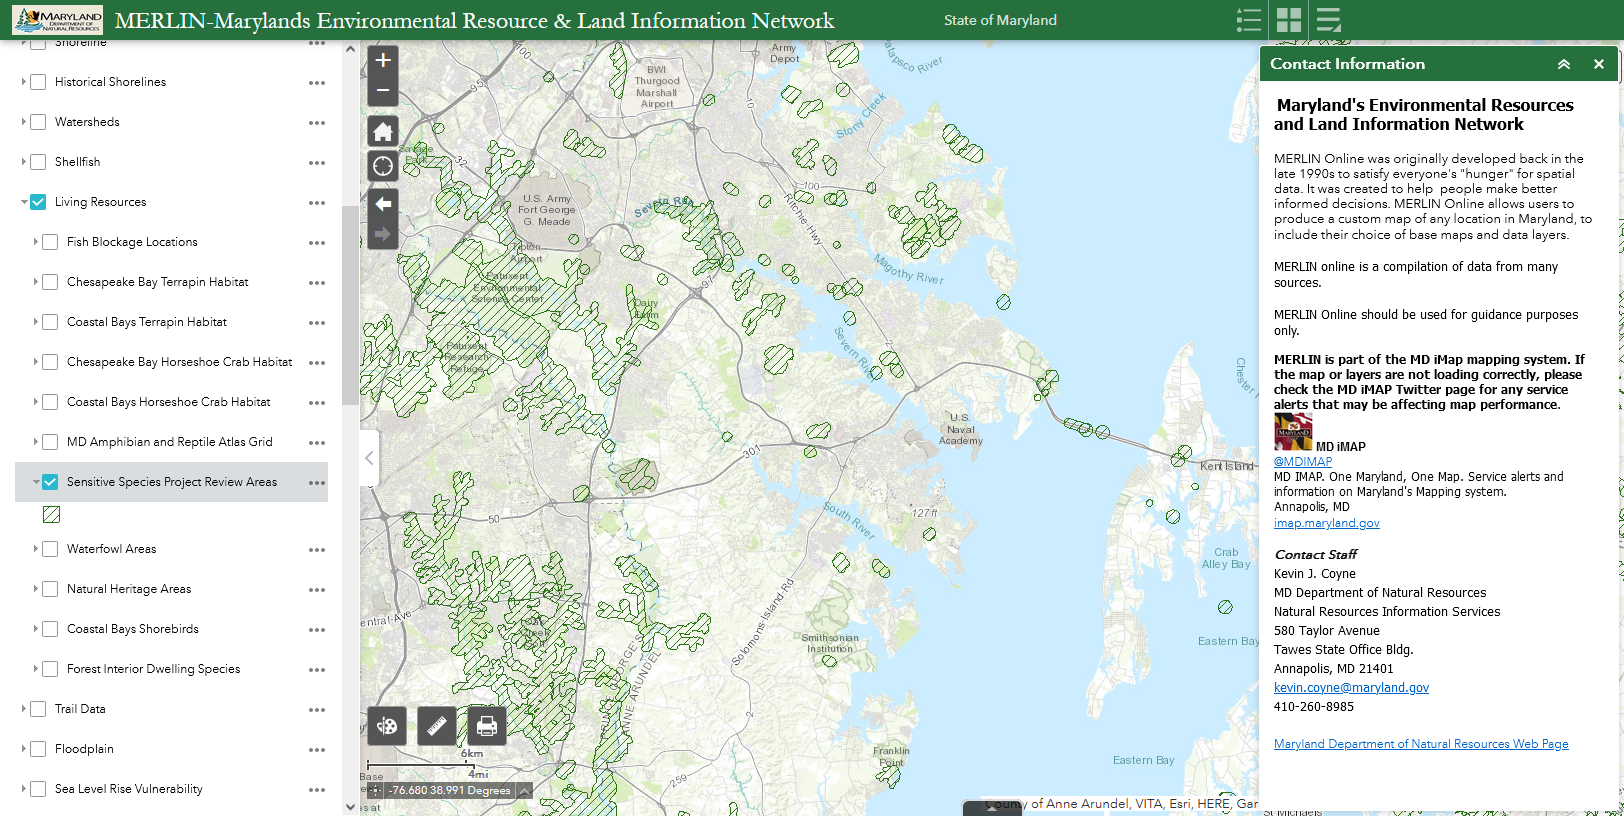 Maryland's Environmental Resources and Land Information Network (MERLIN Online)